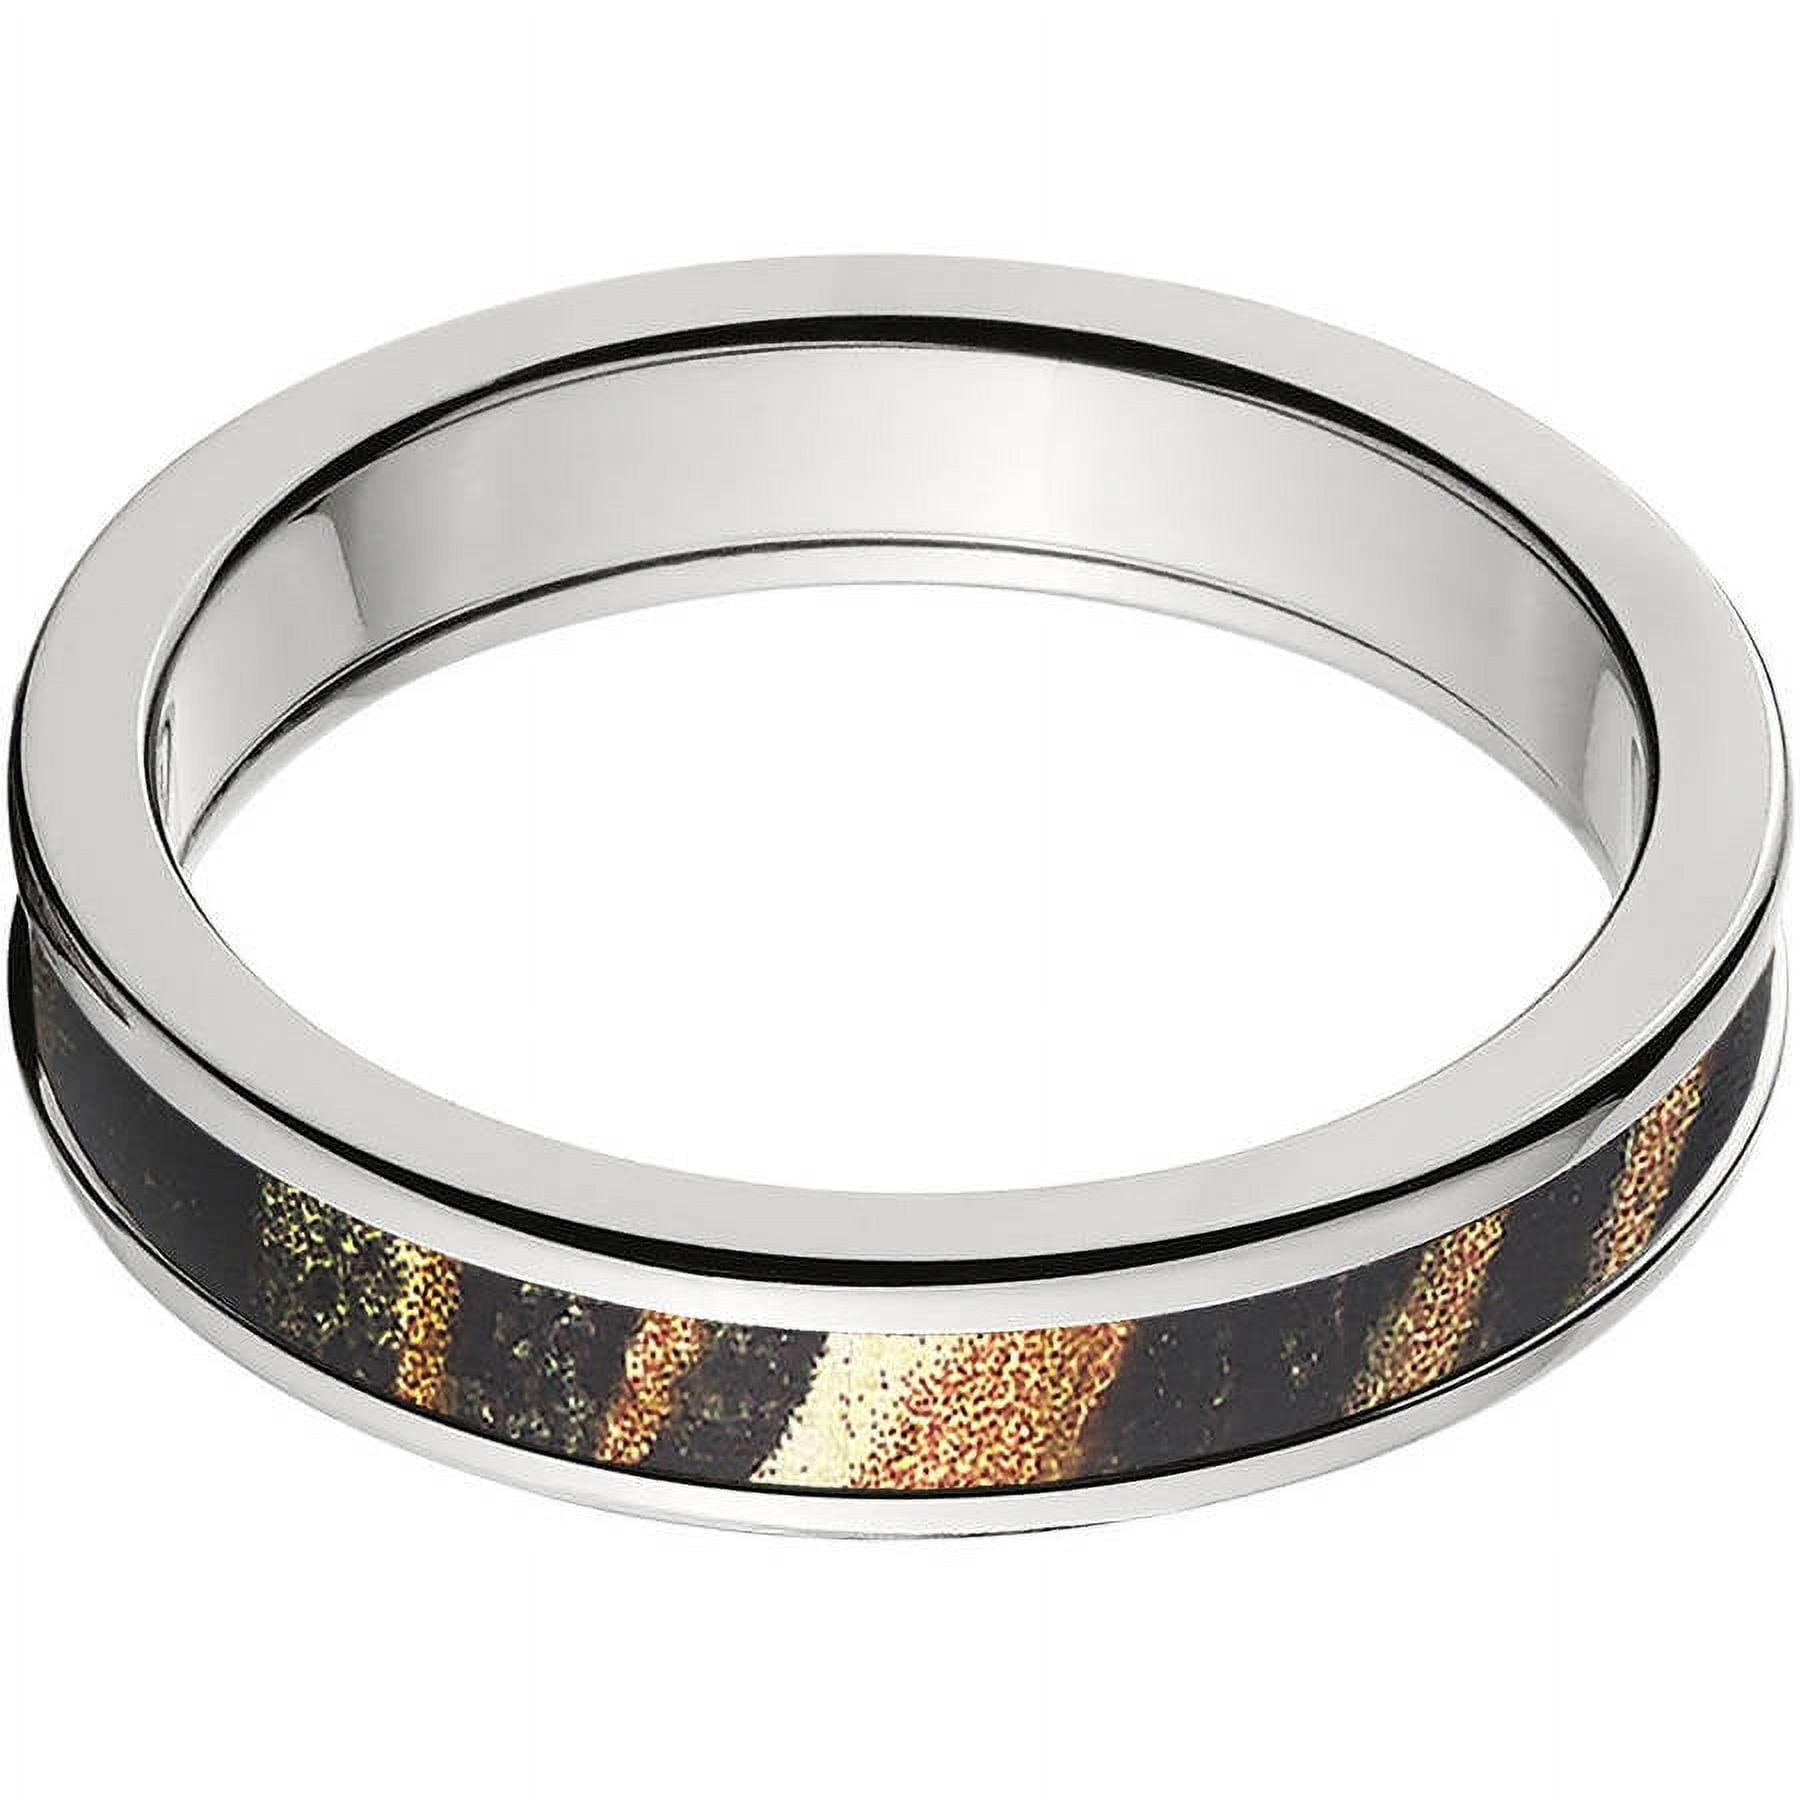 Mossy Oak Break Up Infinity Camo1 Carat T.G.W. Round CZ in 14kt White Gold  Prong Setting Cobalt Engagement Ring with Polished Edges and Deluxe Comfort  Fit - Walmart.com